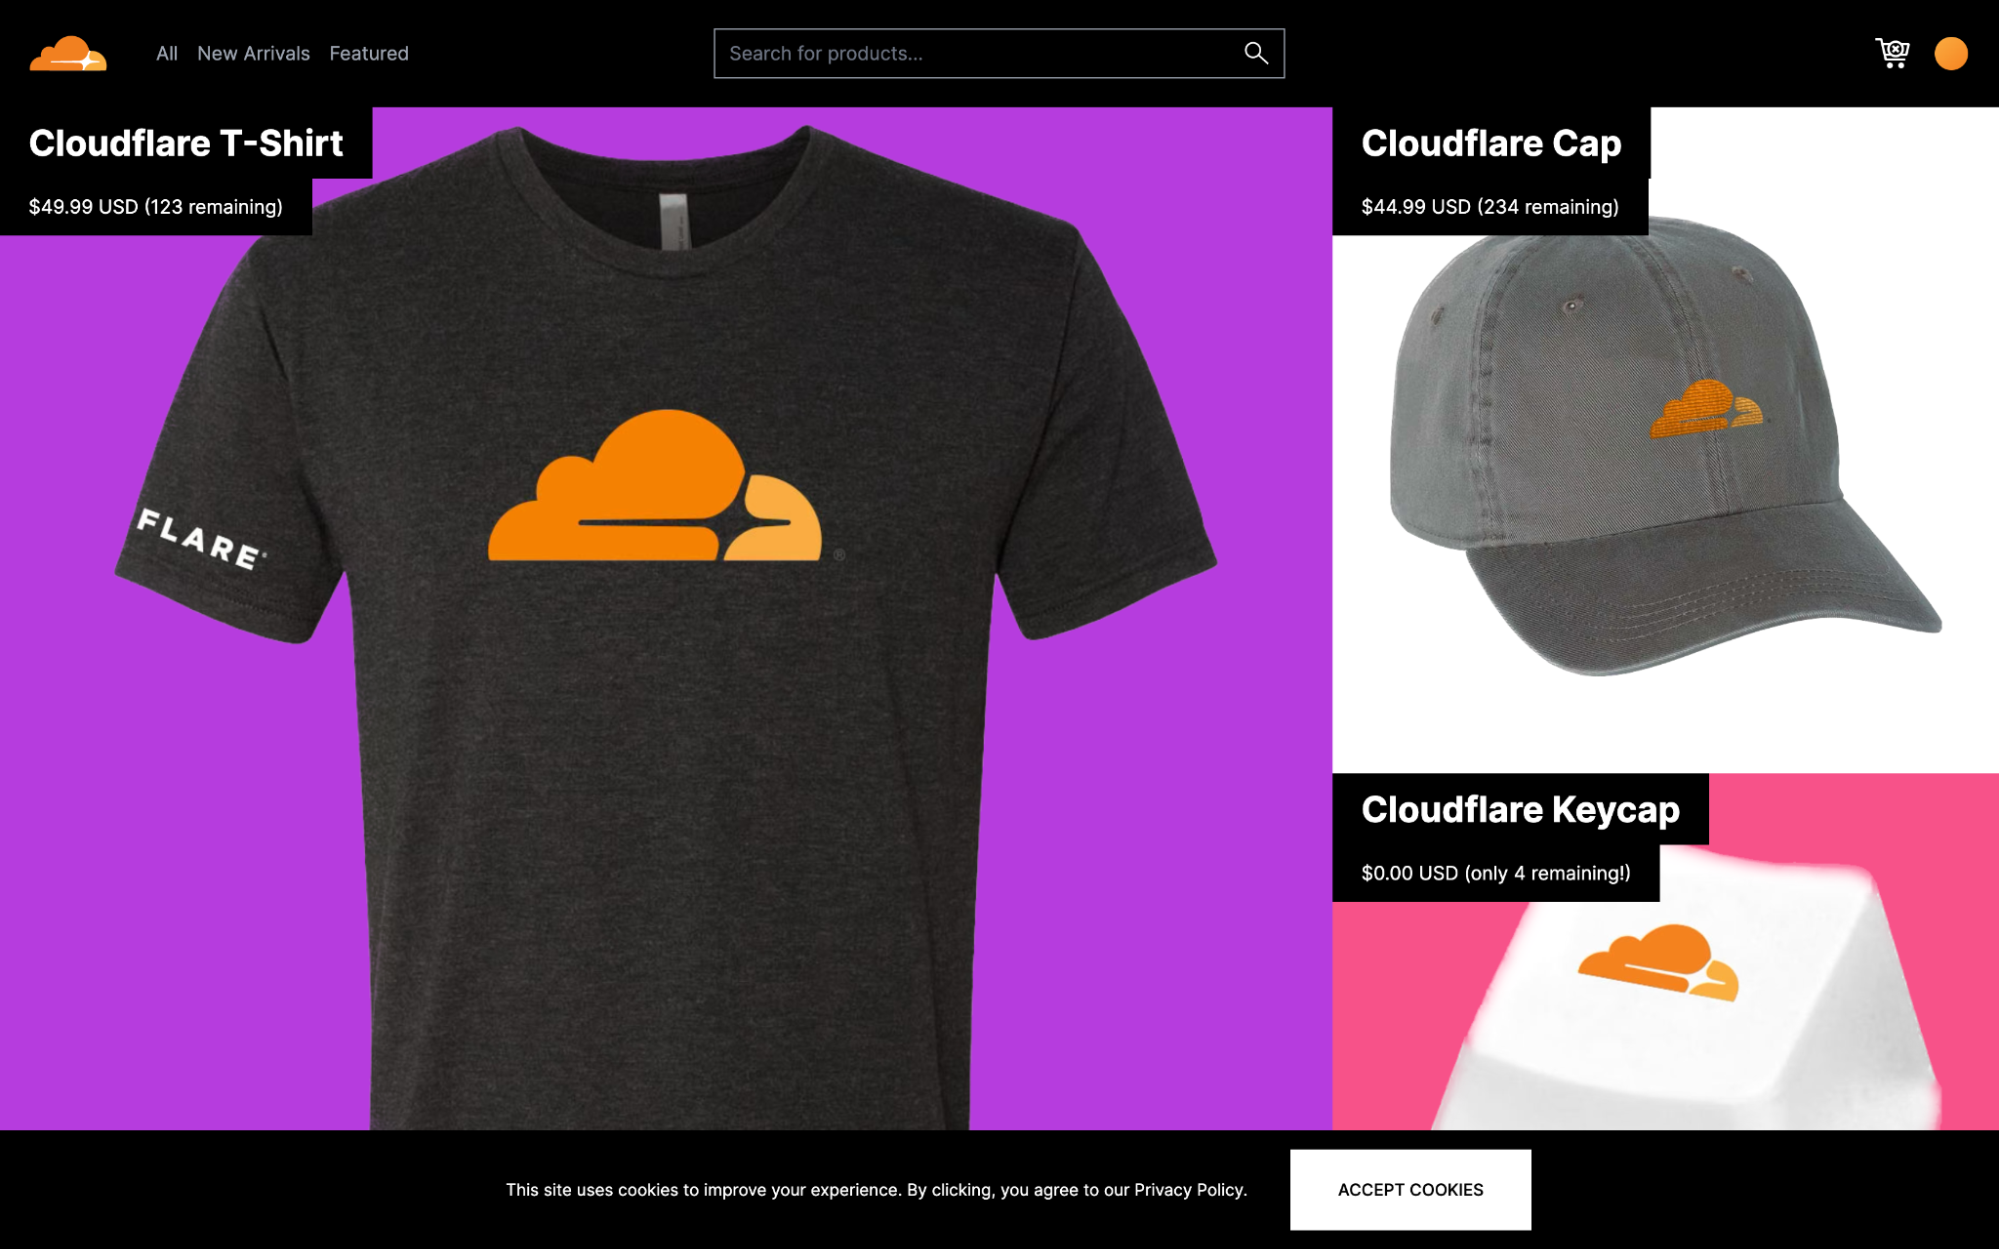 A screenshot of the landing page of a demo Cloudflare e-commerce website selling a t-shirt, cap and keycap. Each item is branded with the Cloudflare logo, and has a price and 